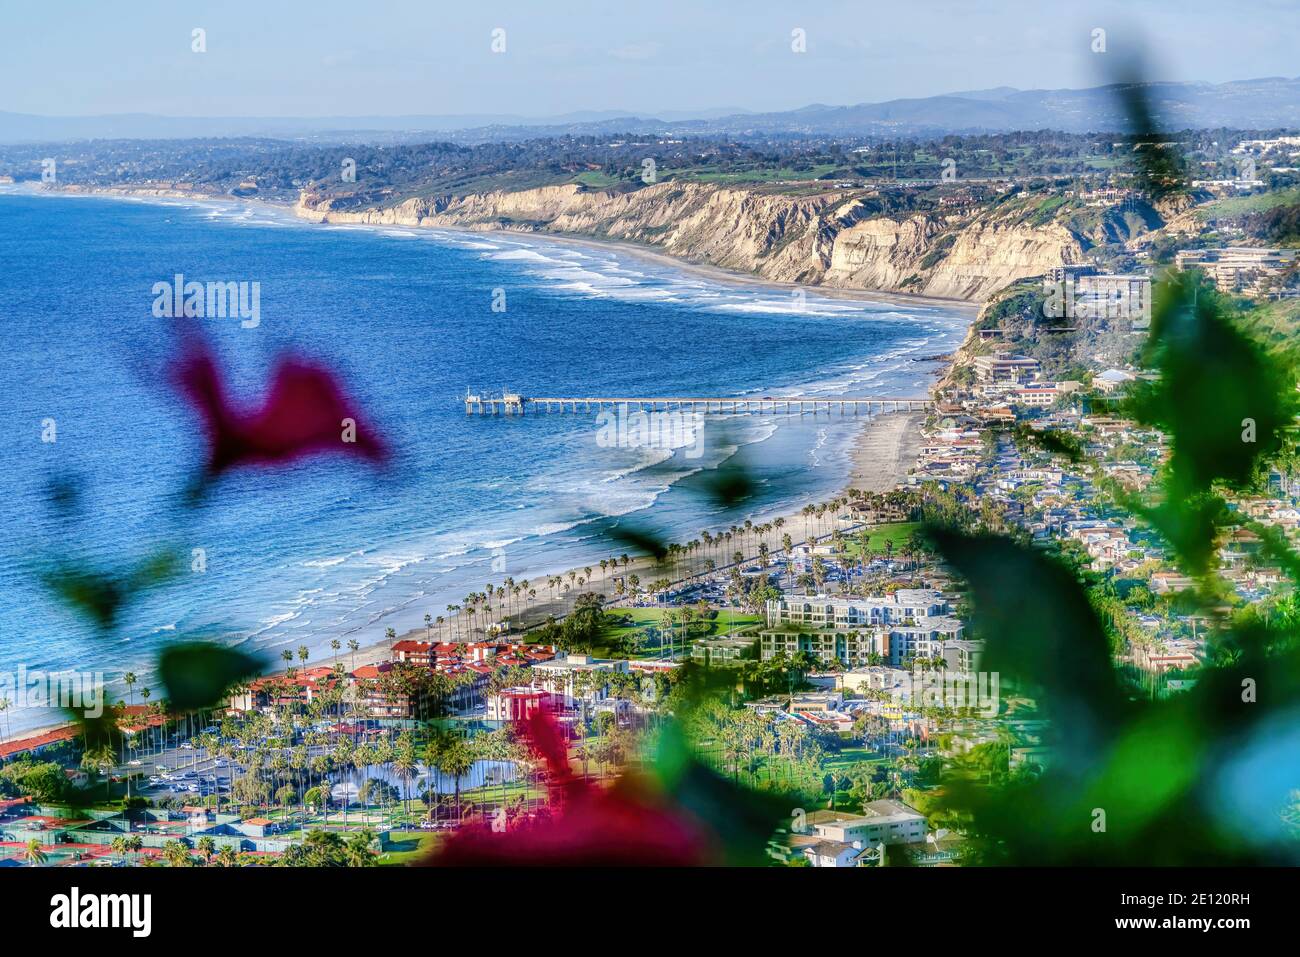 Blue ocean with pier at San Diego California with cloudy sky on an aerial view Stock Photo